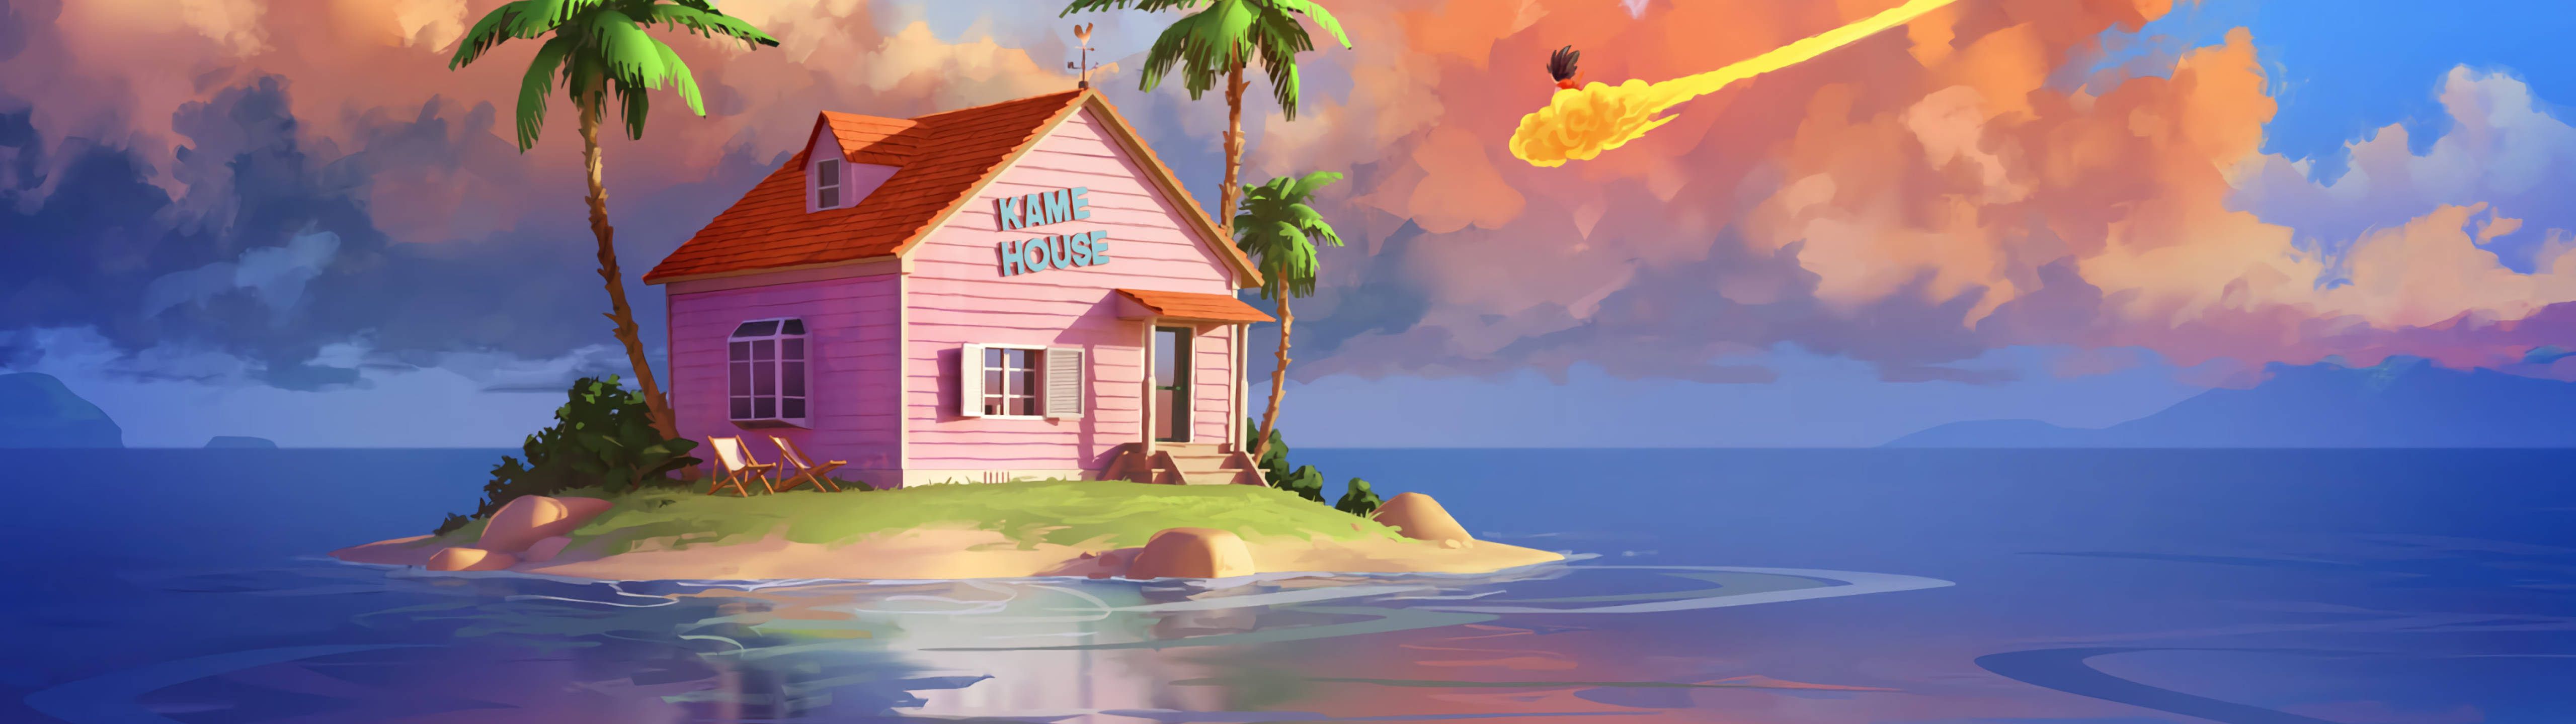 5120x1440 Game Kame House Dragonball Z Background